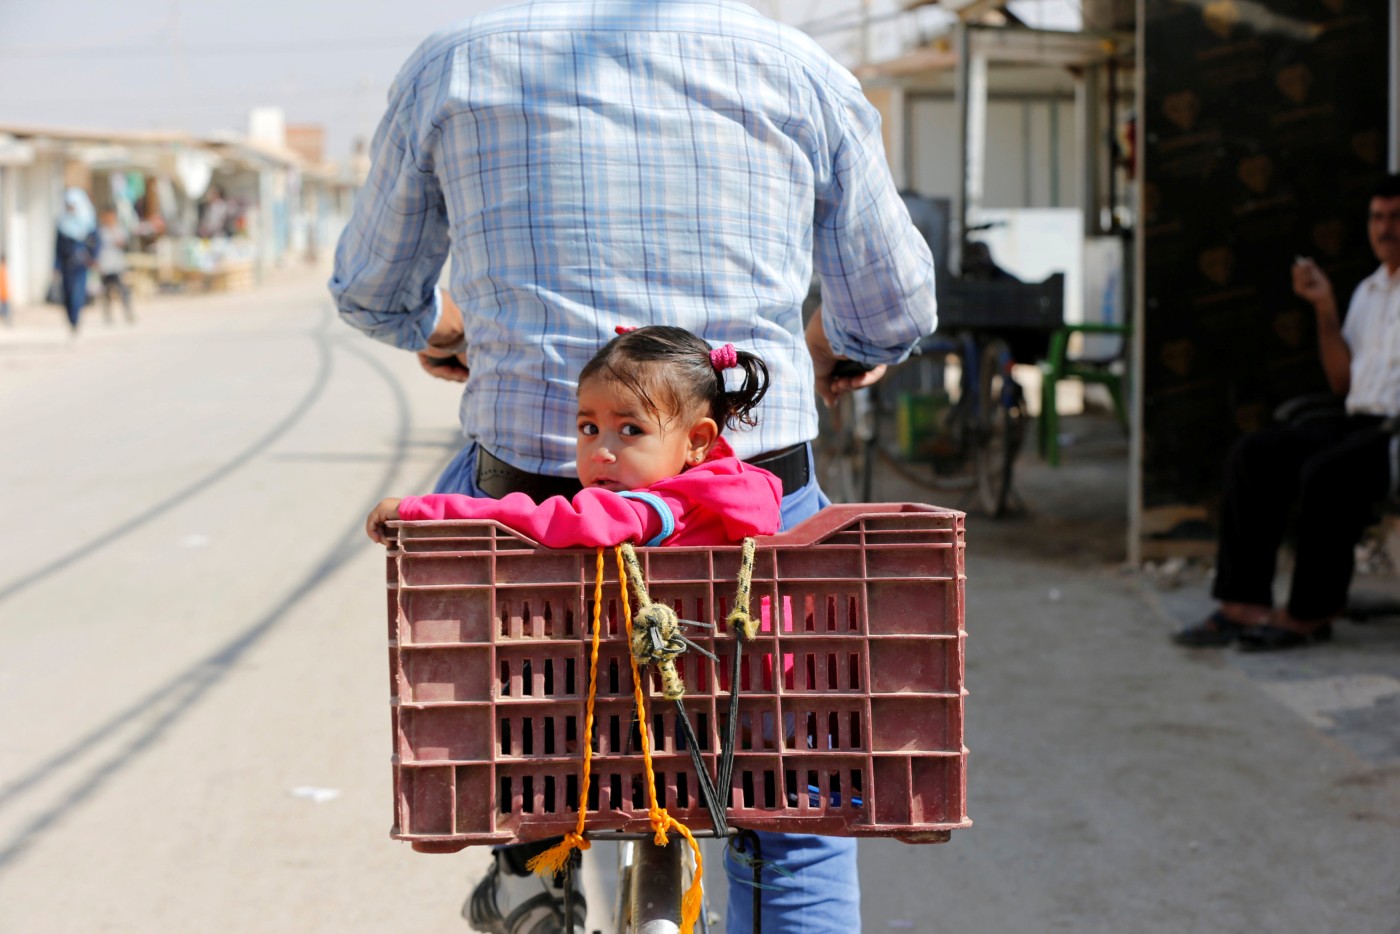 Syrian refugee riding a bicycle with his daughter in the main market, Zaatari refugee camp in the Jordanian city of Mafraq - 2016 (Reuters)